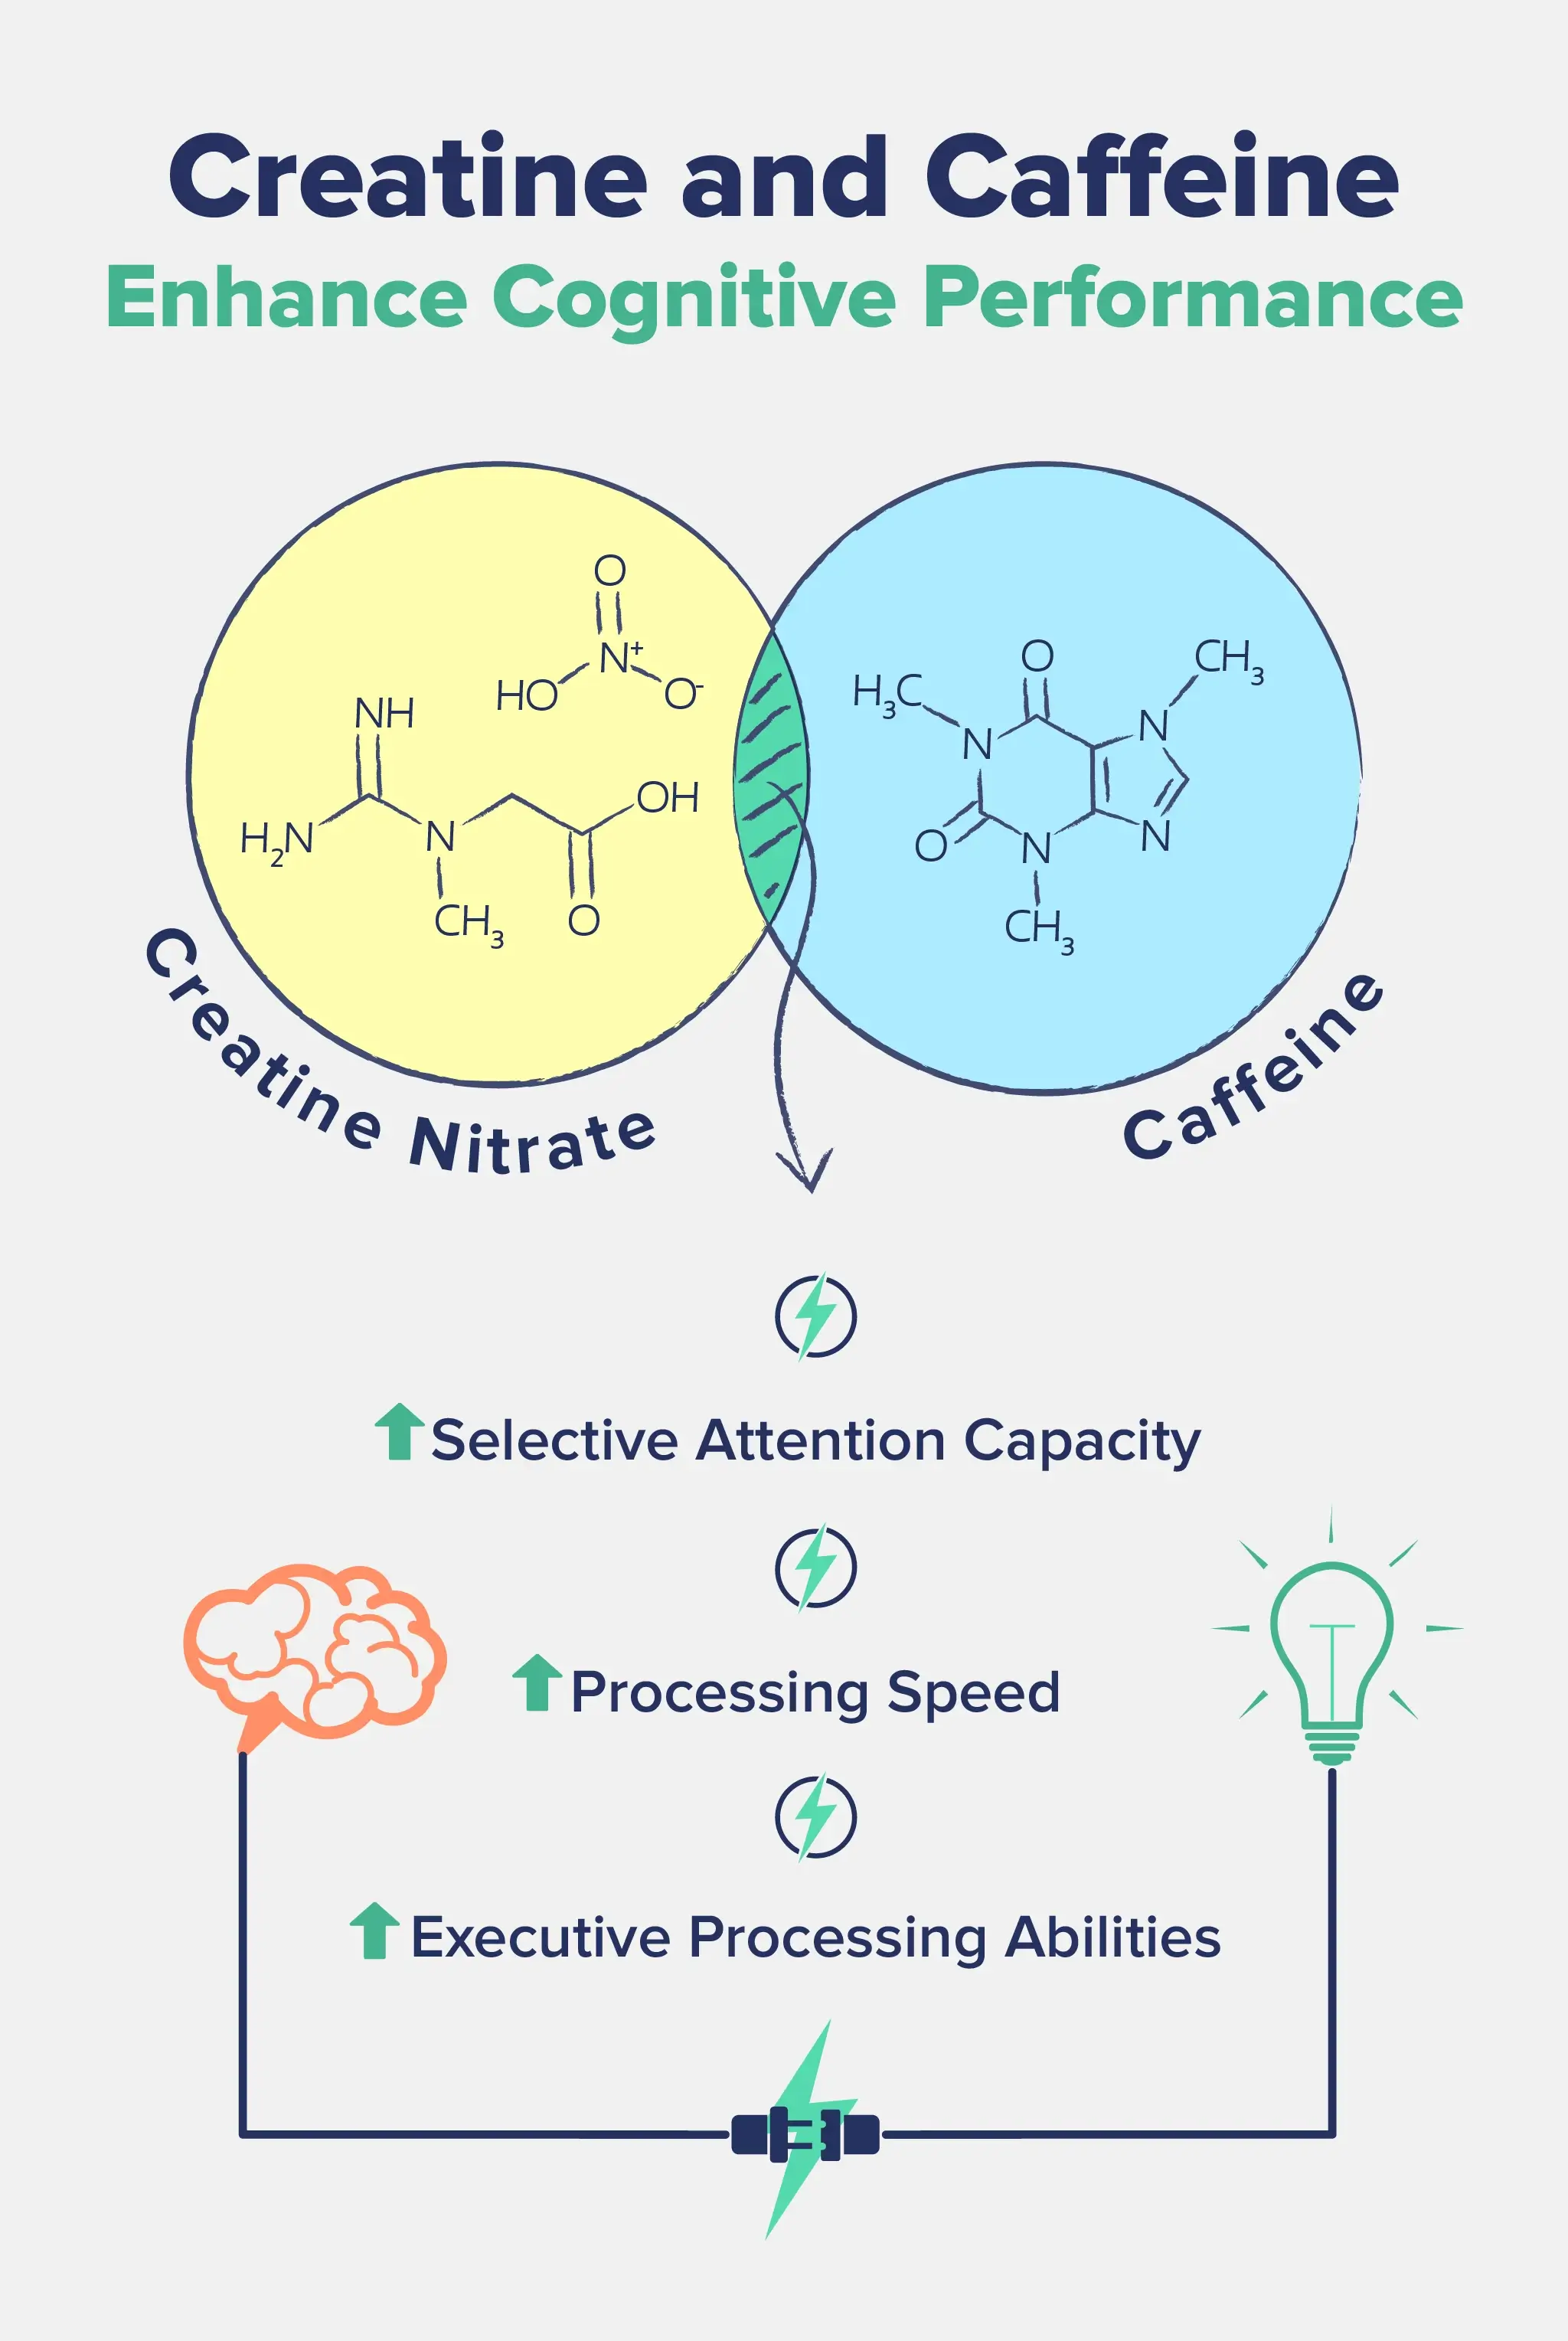 The infographic titled "Creatine and Caffeine Enhance Cognitive Performance" shows a Venn diagram with "Creatine Nitrate" and "Caffeine" circles, highlighting their combined benefits. 